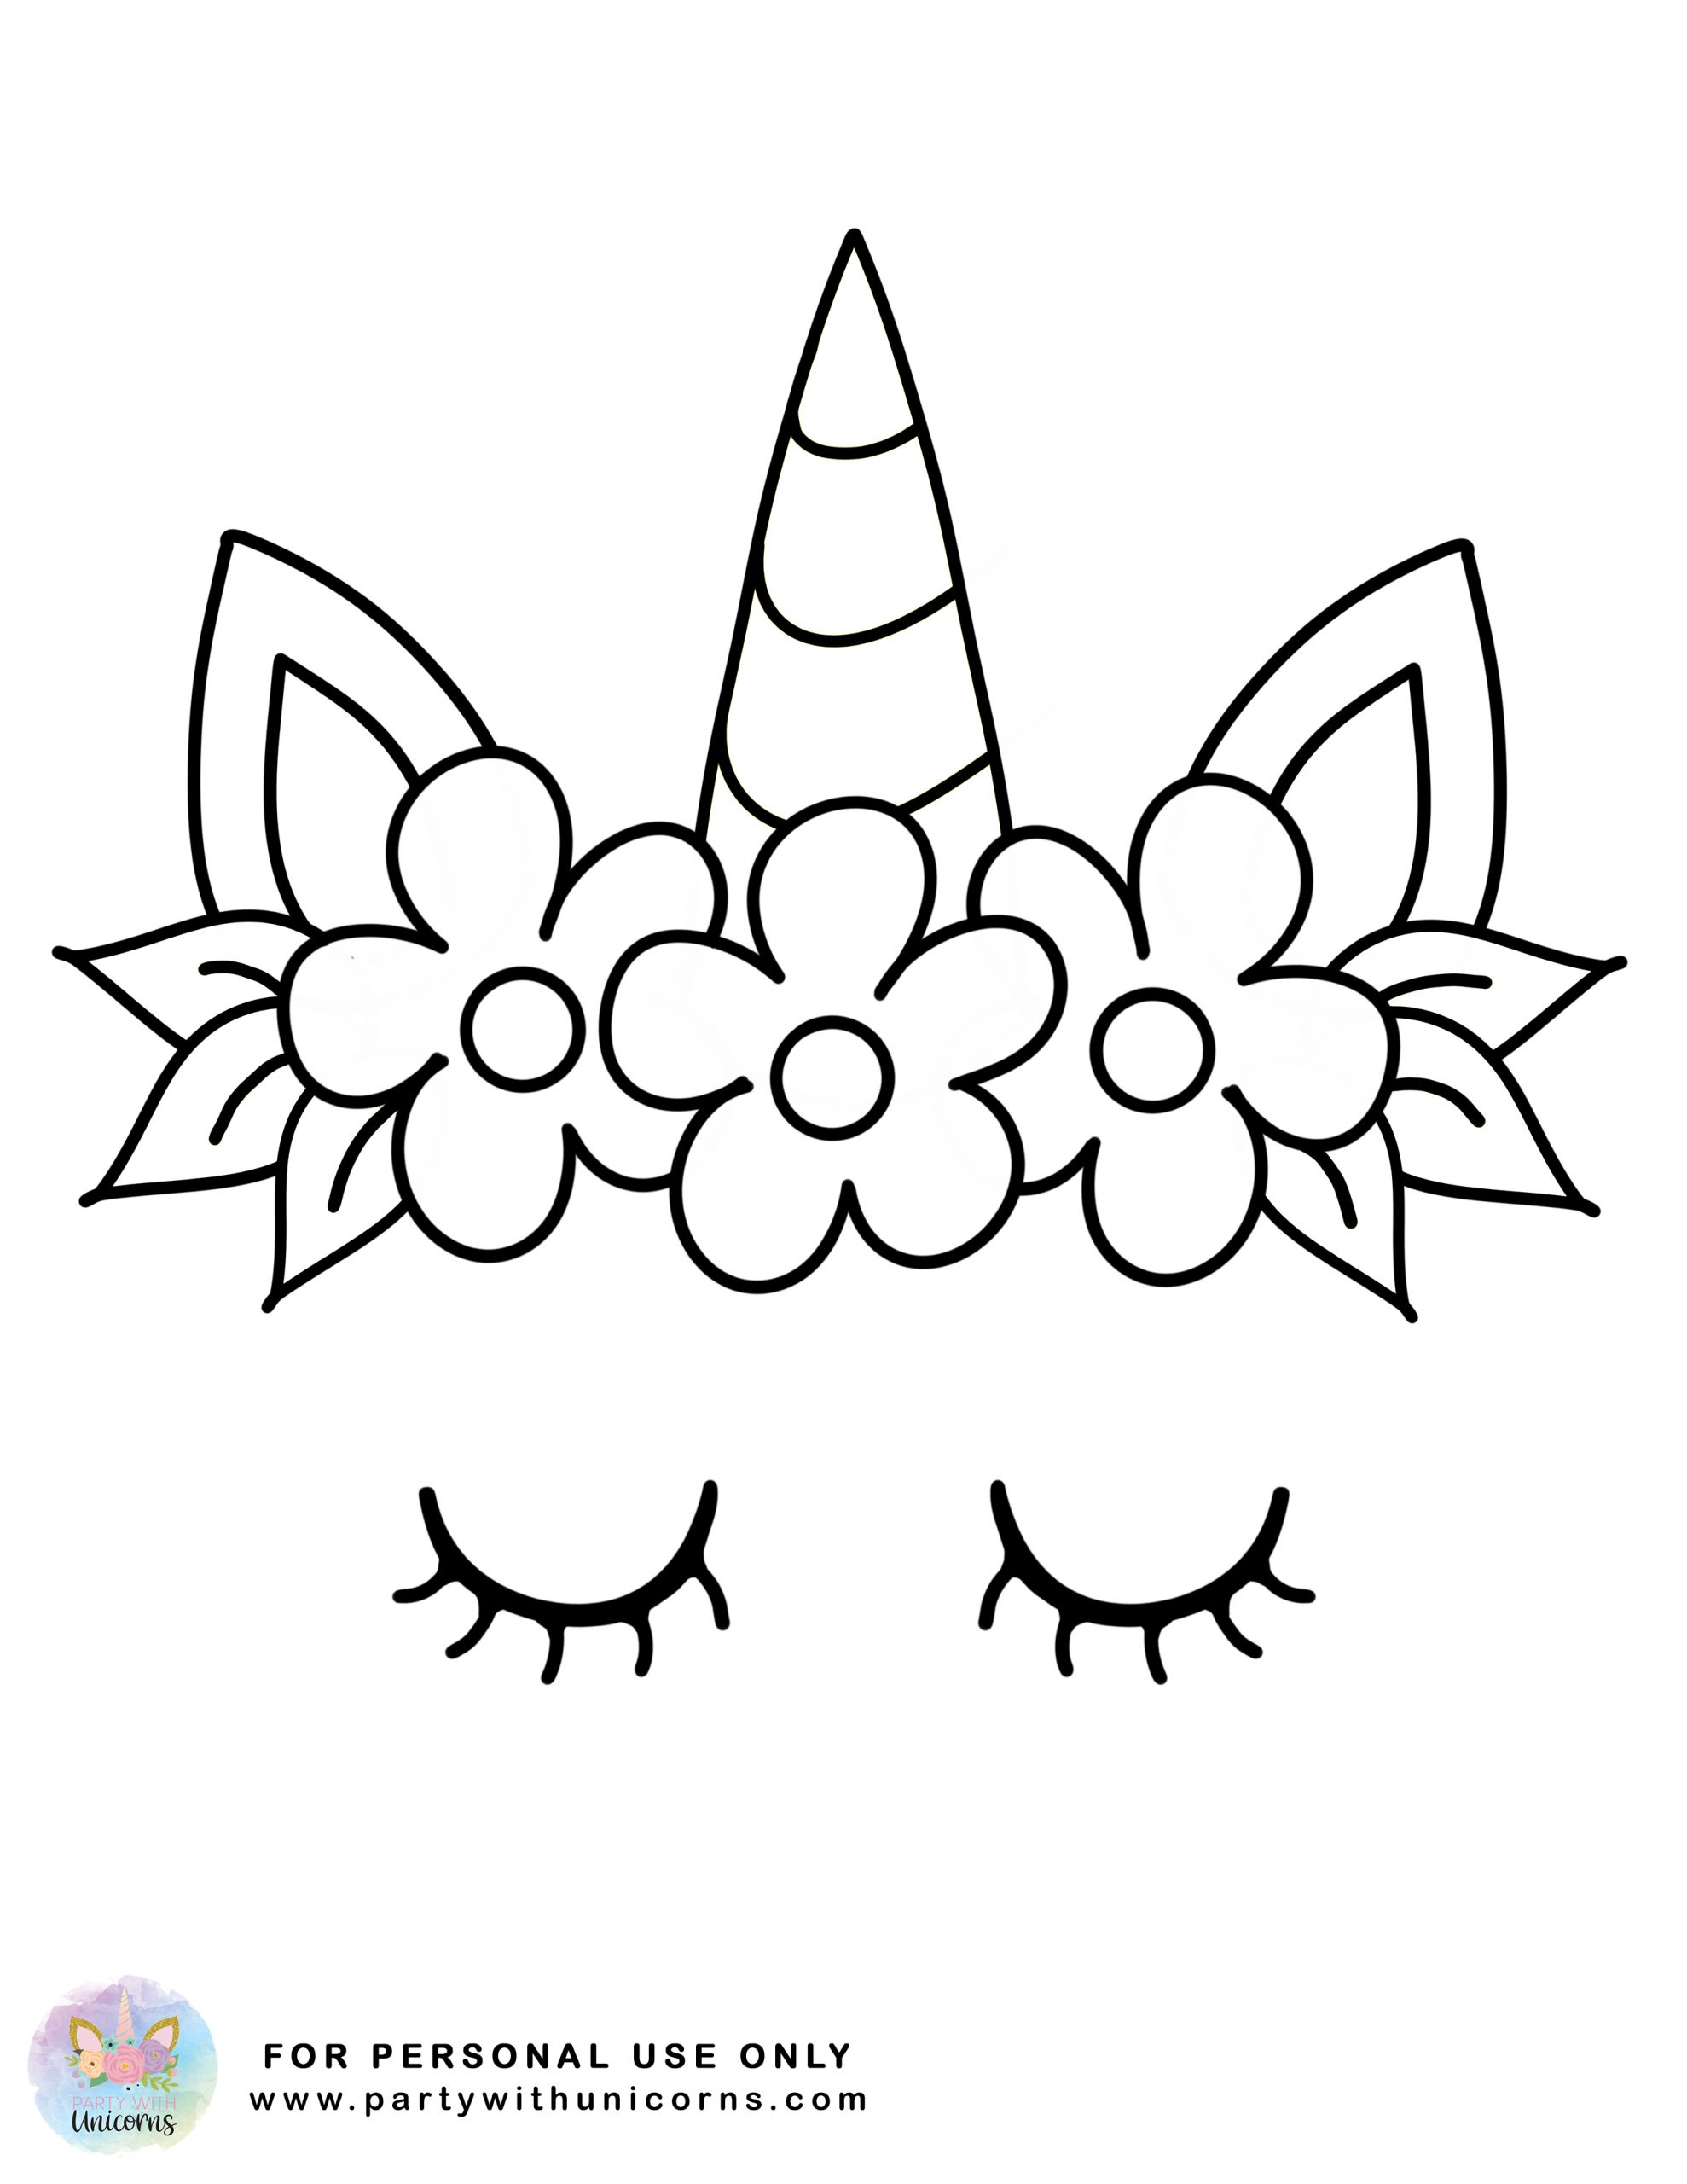 Unicorn Coloring Pages - Free Printable Coloring Book - Party with ...